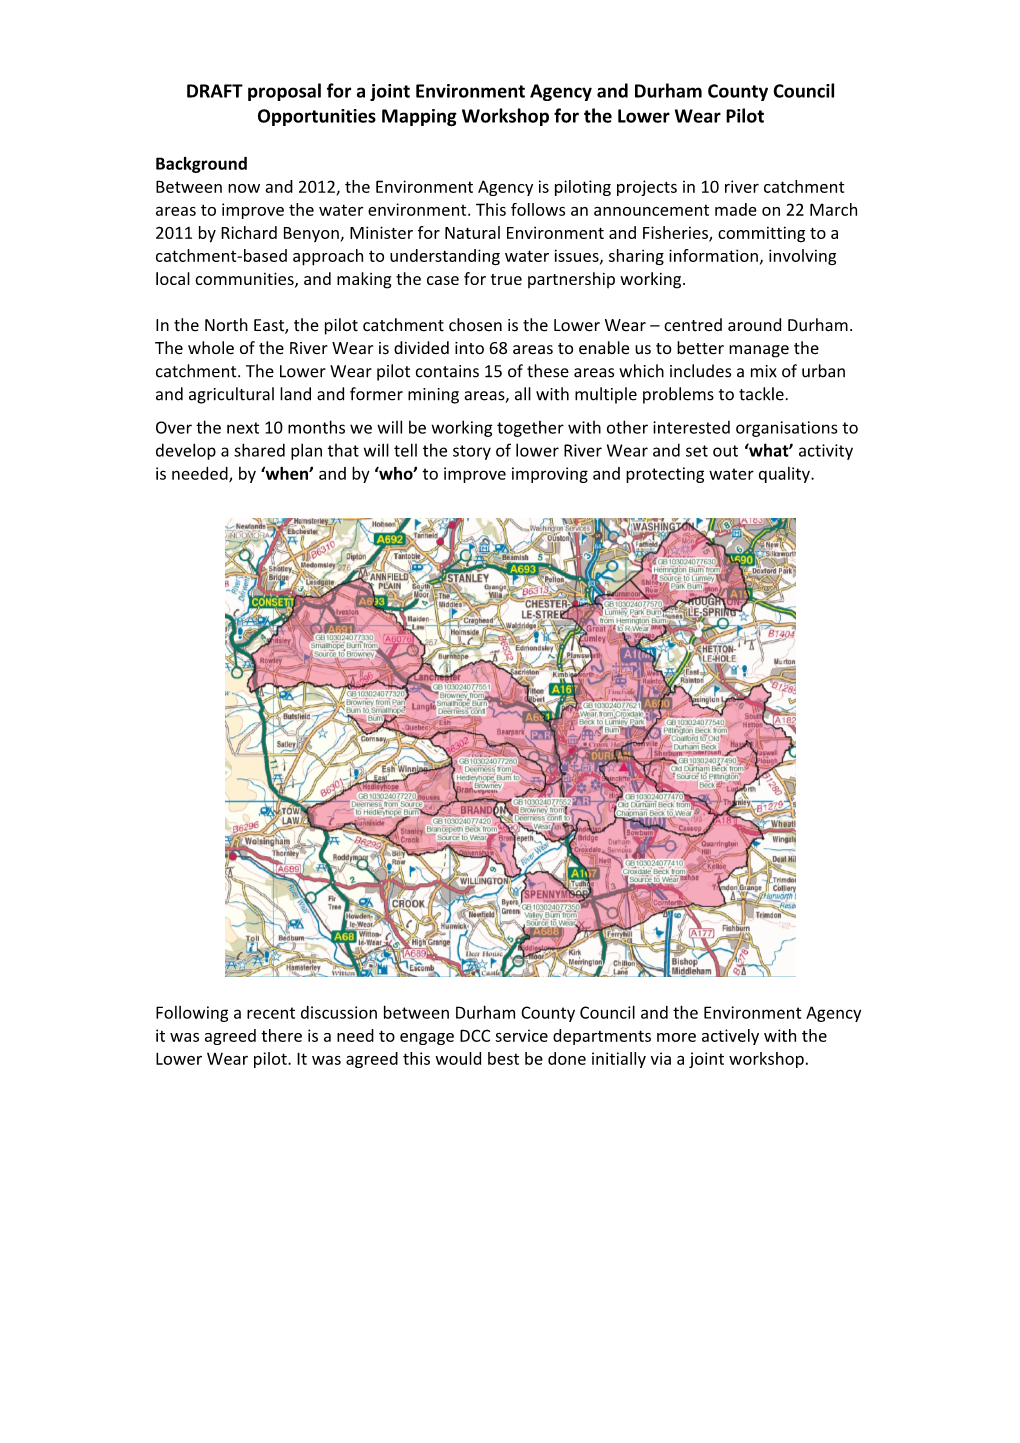 DRAFT Proposal for a Joint Environment Agency and Durham County Concil Opportunities Mapping